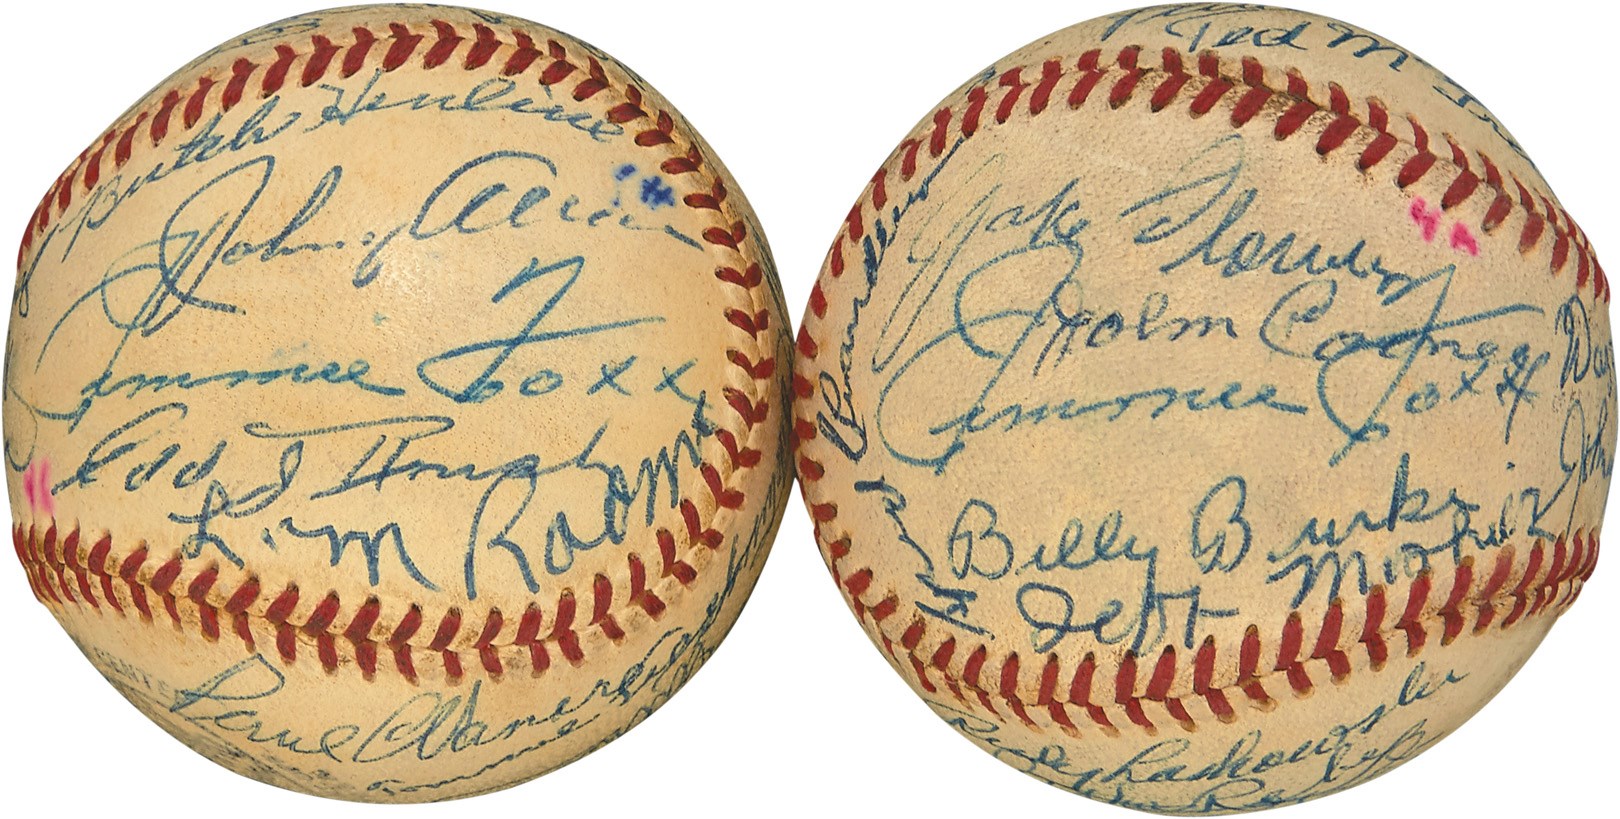 The John O'connor Signed Baseball Collection - 1956 Old Timer's Day Heavily Signed Baseball Pair w/Jimmie Foxx (PSA)